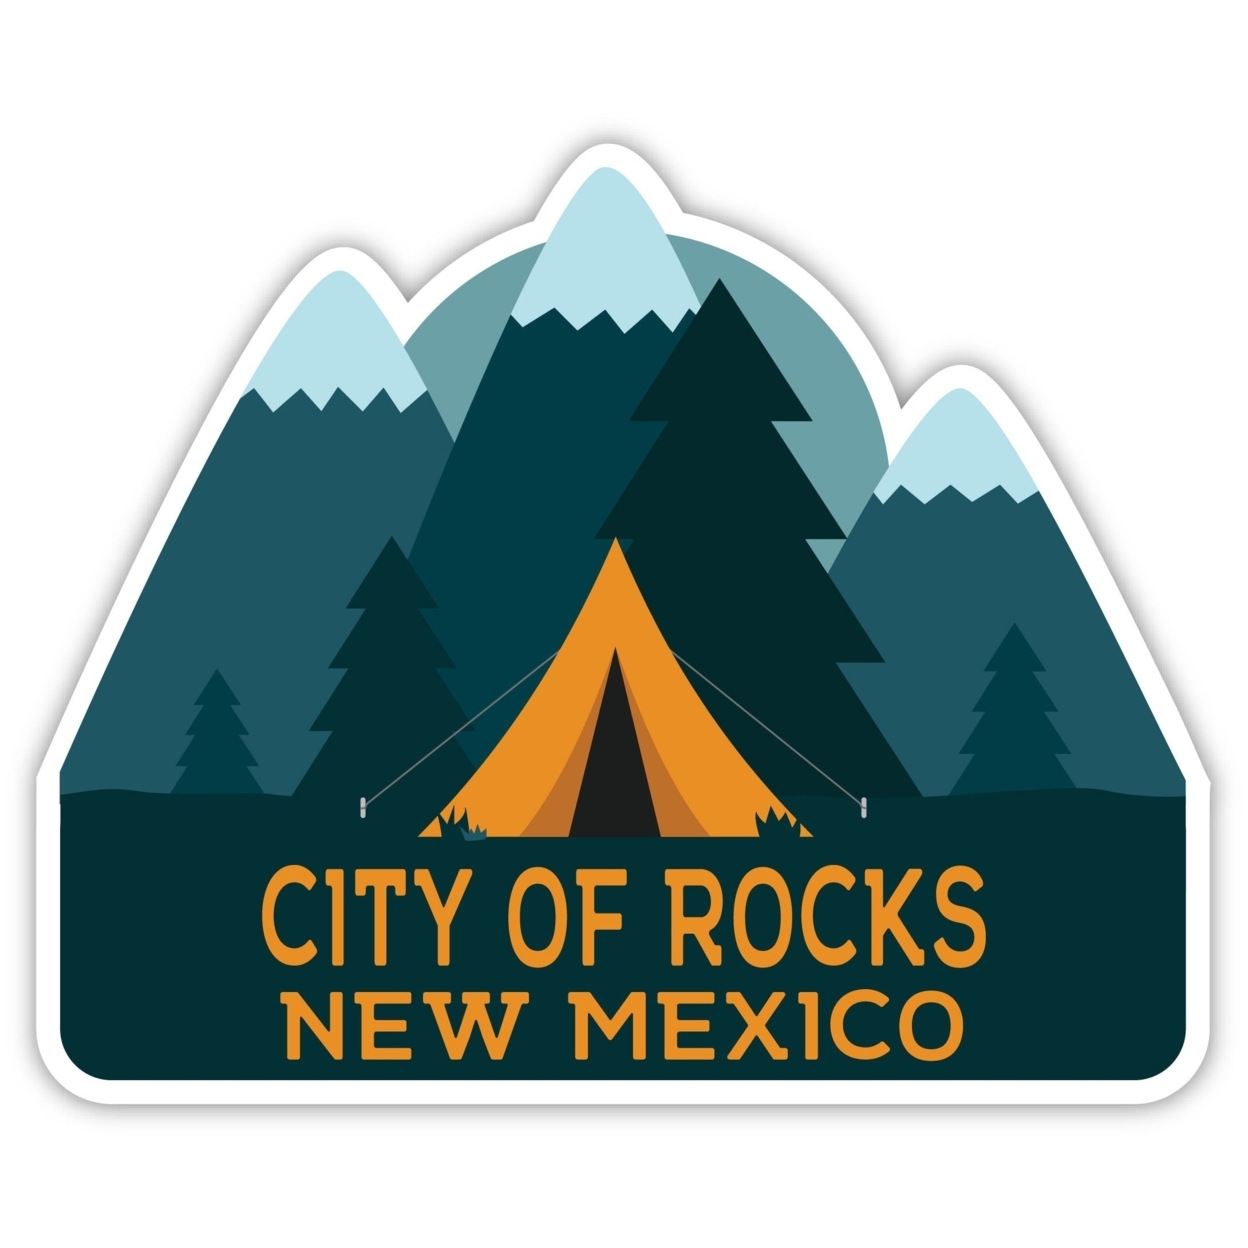 City Of Rocks New Mexico Souvenir Decorative Stickers (Choose Theme And Size) - 4-Pack, 6-Inch, Tent